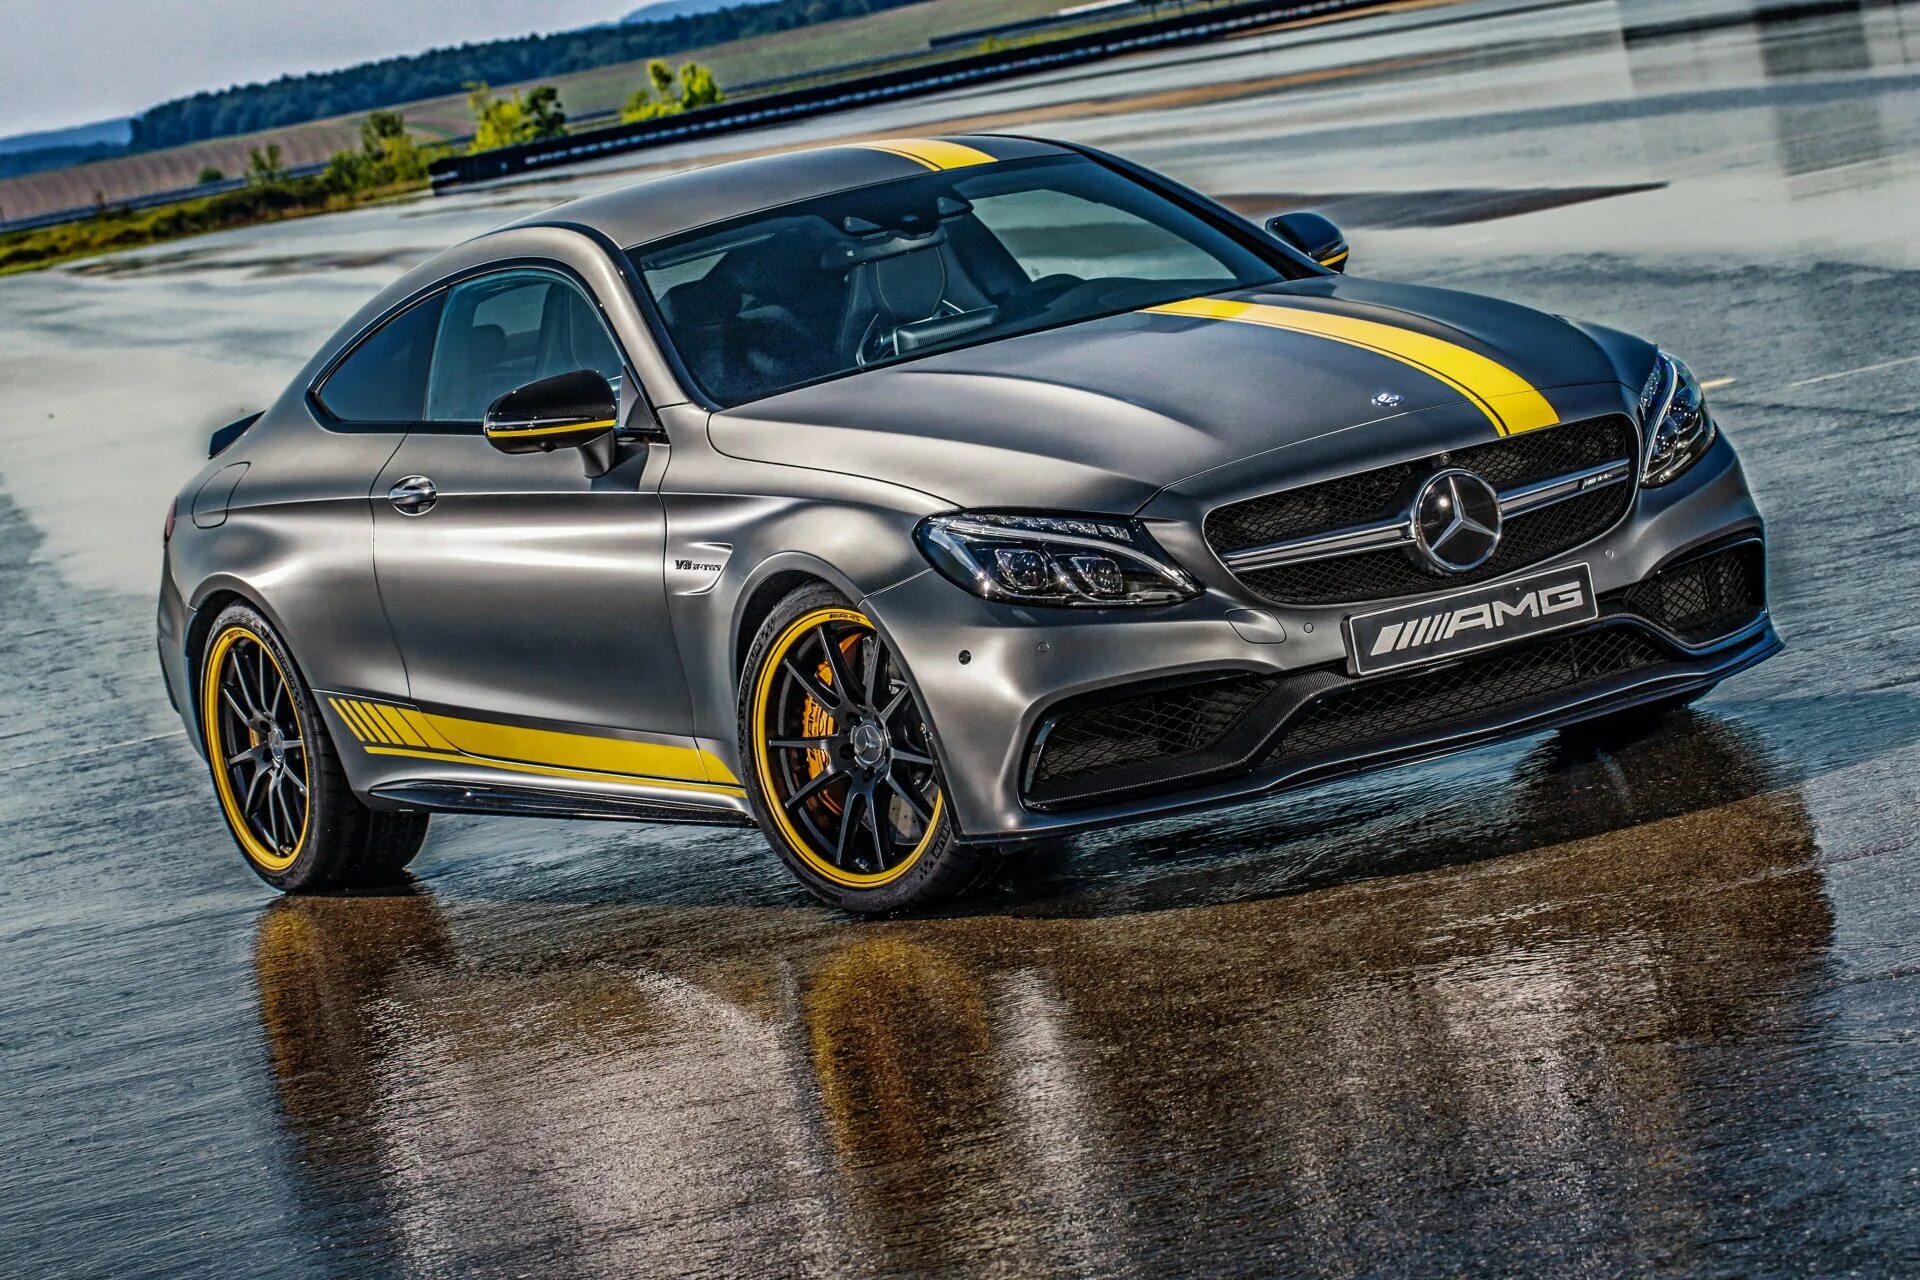 Mercedes c63 AMG. Mercedes Benz c63 AMG Coupe. Мерседес Бенц АМГ 63. Мерседес Бенц AMG c63 Coupe.